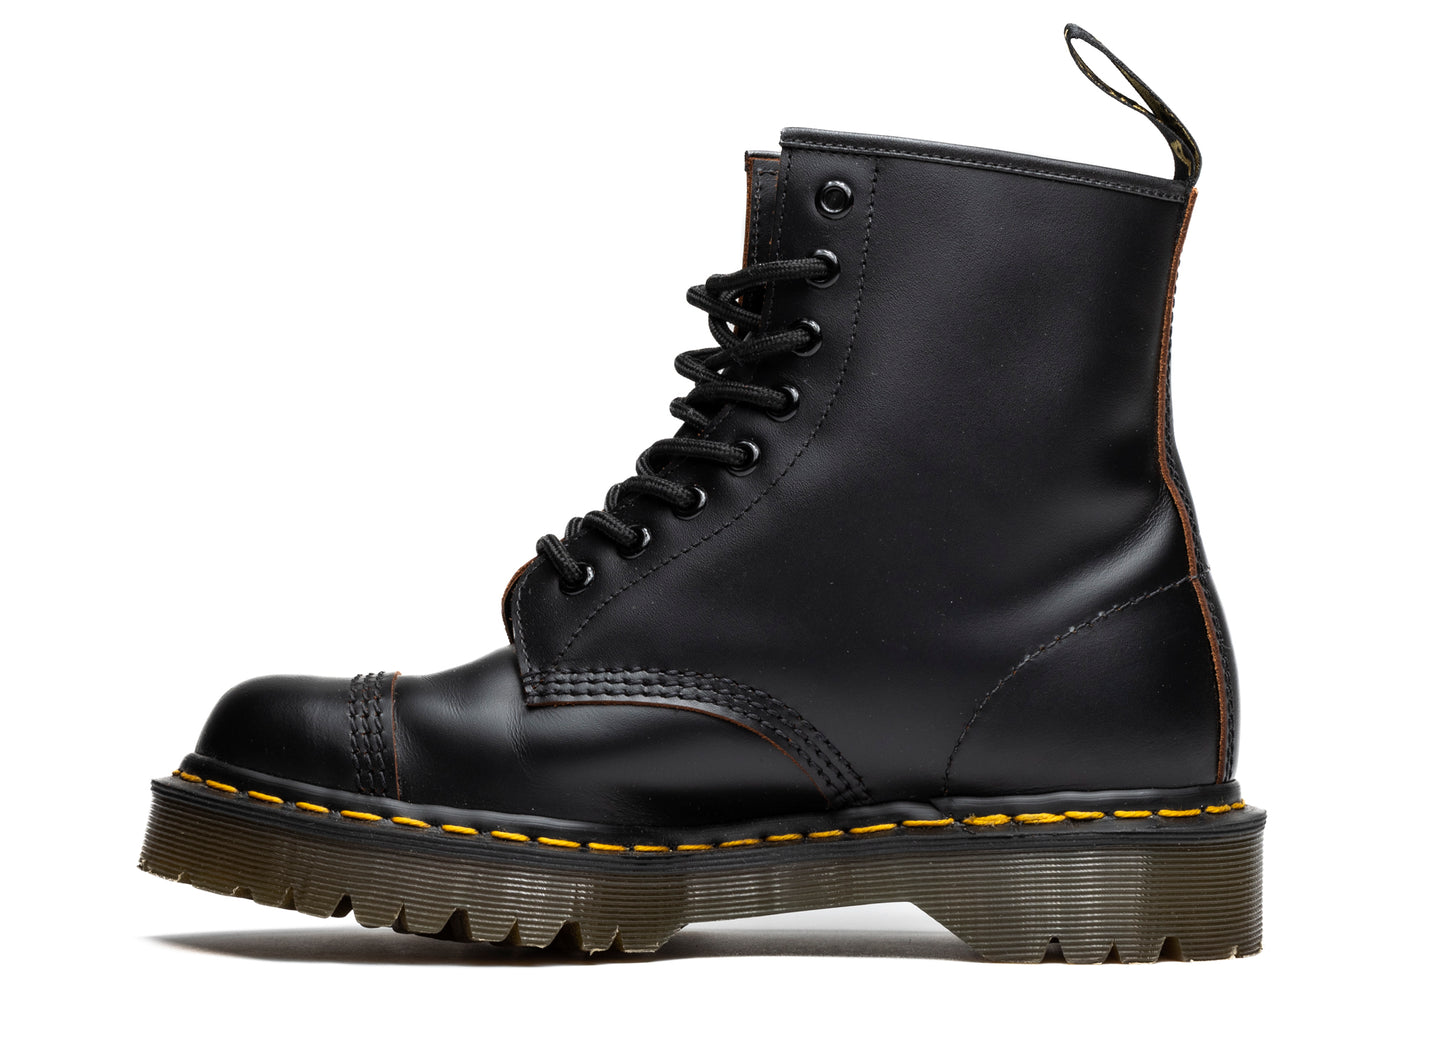 Dr. Martens 1460 Bex Made in England Toe Cap Boots